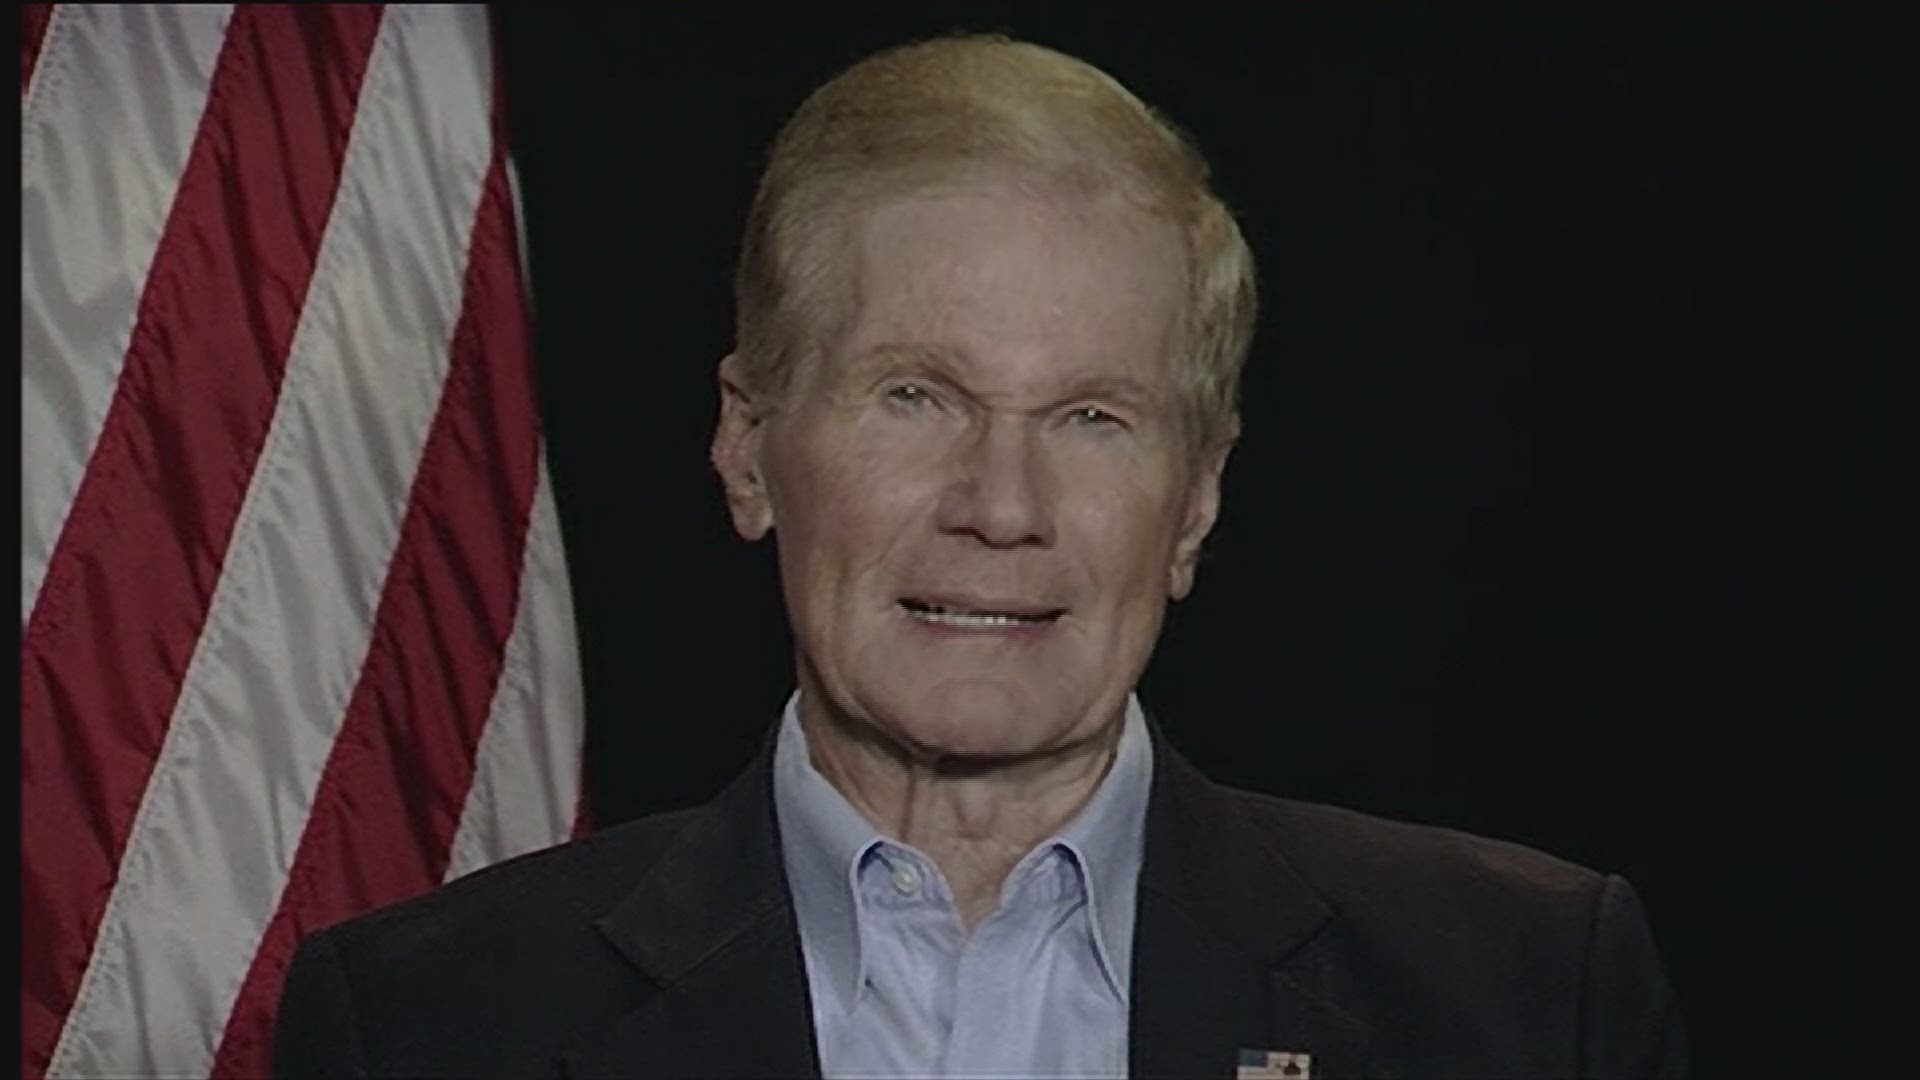 Bill Nelson releases his statement following Rick Scott's press conference Thursday night when he called for investigation into Broward and Palm Beach counties. Nelson said, "Scott is abusing the full force of his public office as Governor to stop a compl